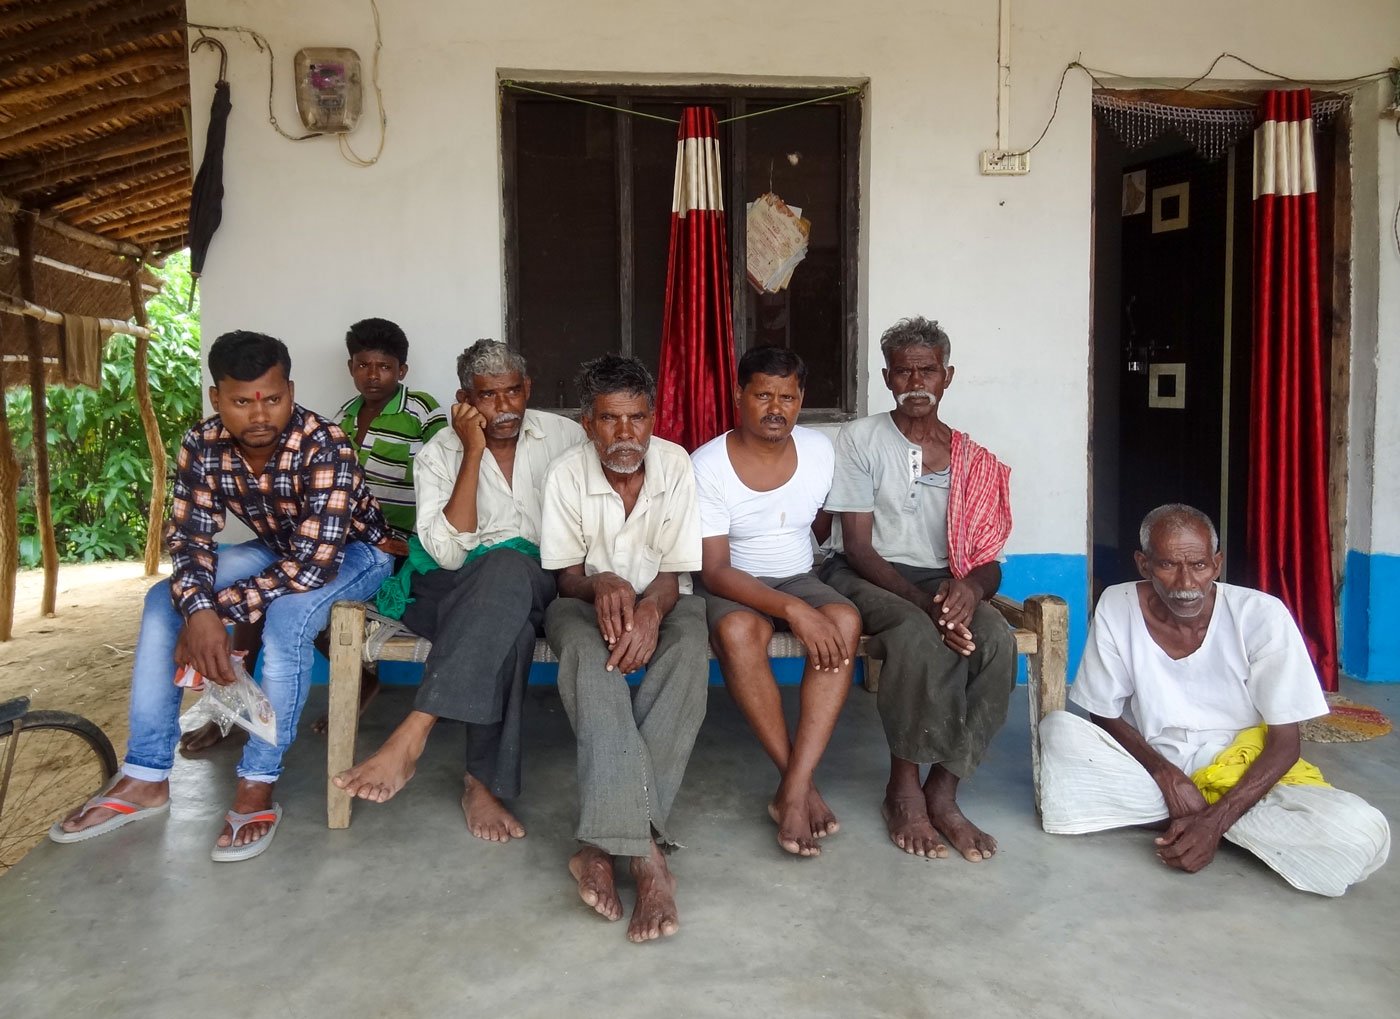 Narayan Uikey (extreme right), 70, and a veteran farmer in Garada at their home late July waiting desperately for rains. Two months have passed since the monsoon began but it hasn’t rained here enough to do the transplantation of the paddy tillers, a trend they say is now a headache in their part